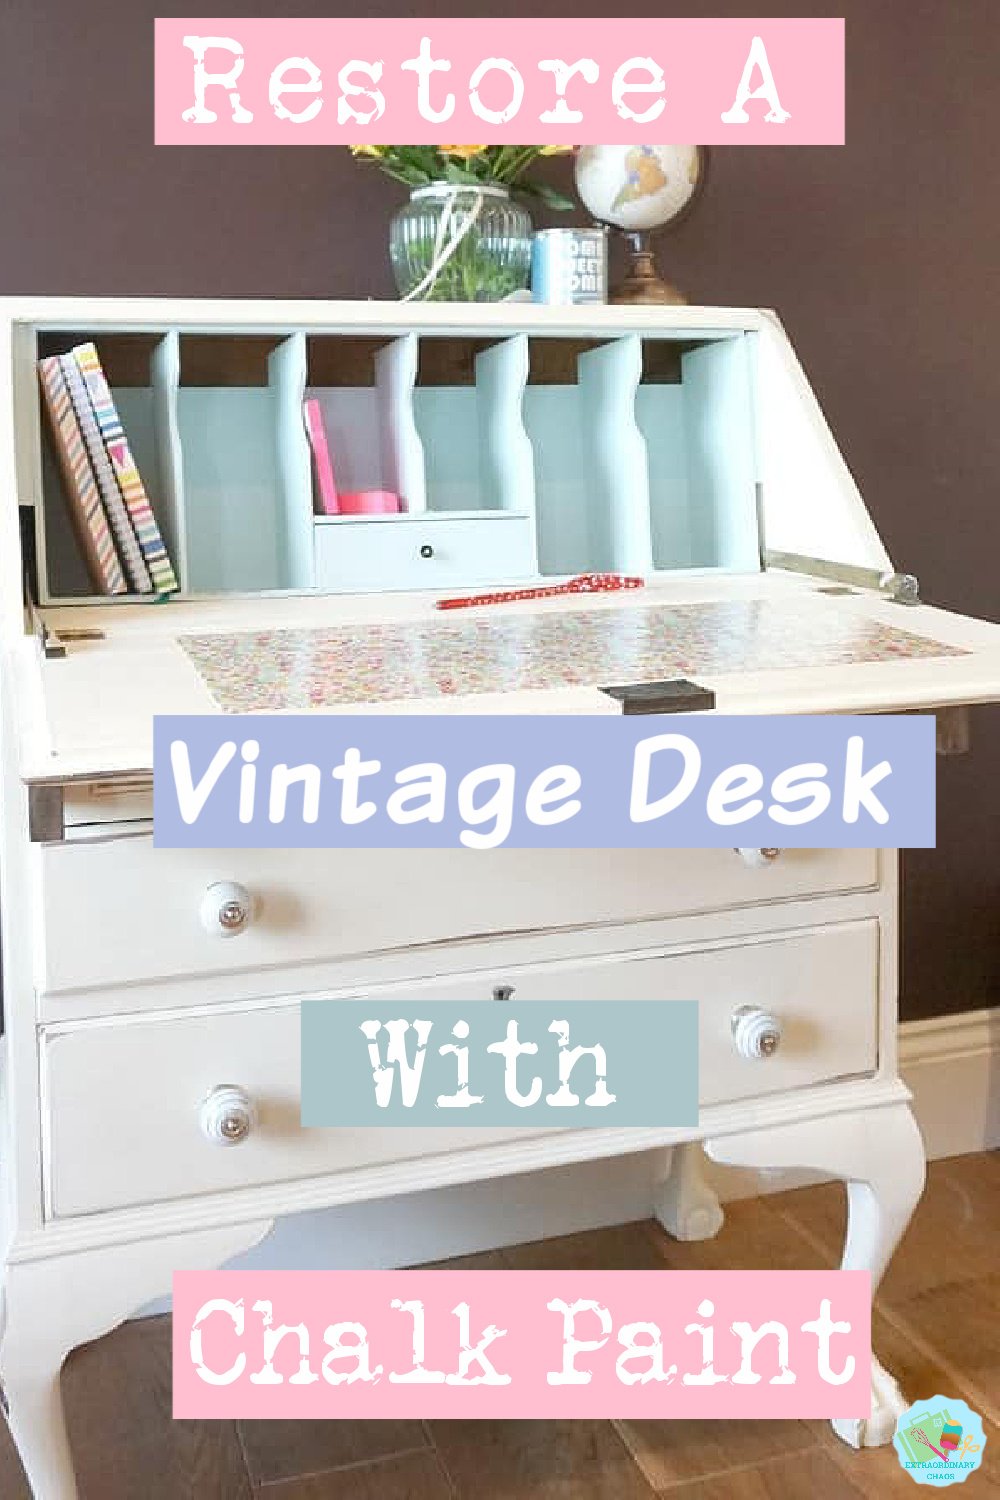 Steps to take to restore a vintage desk with chalk paint